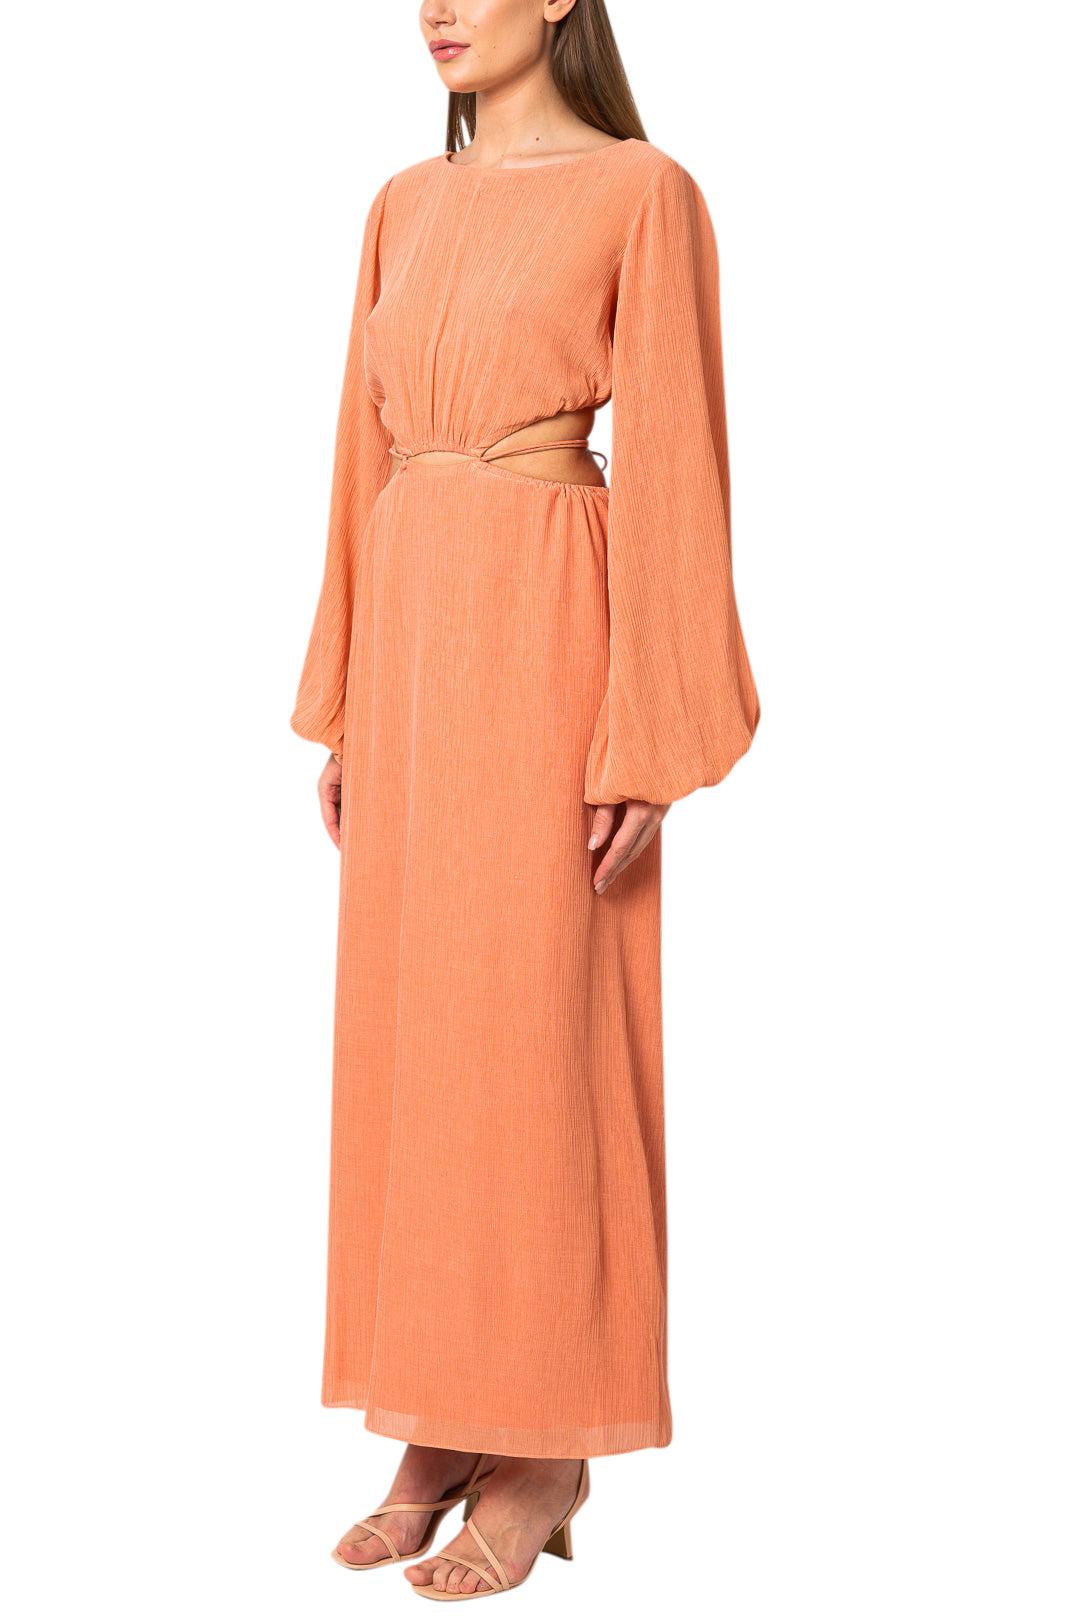 Significant Other-Naomi cut-out maxi dress-SL221084D-dgallerystore